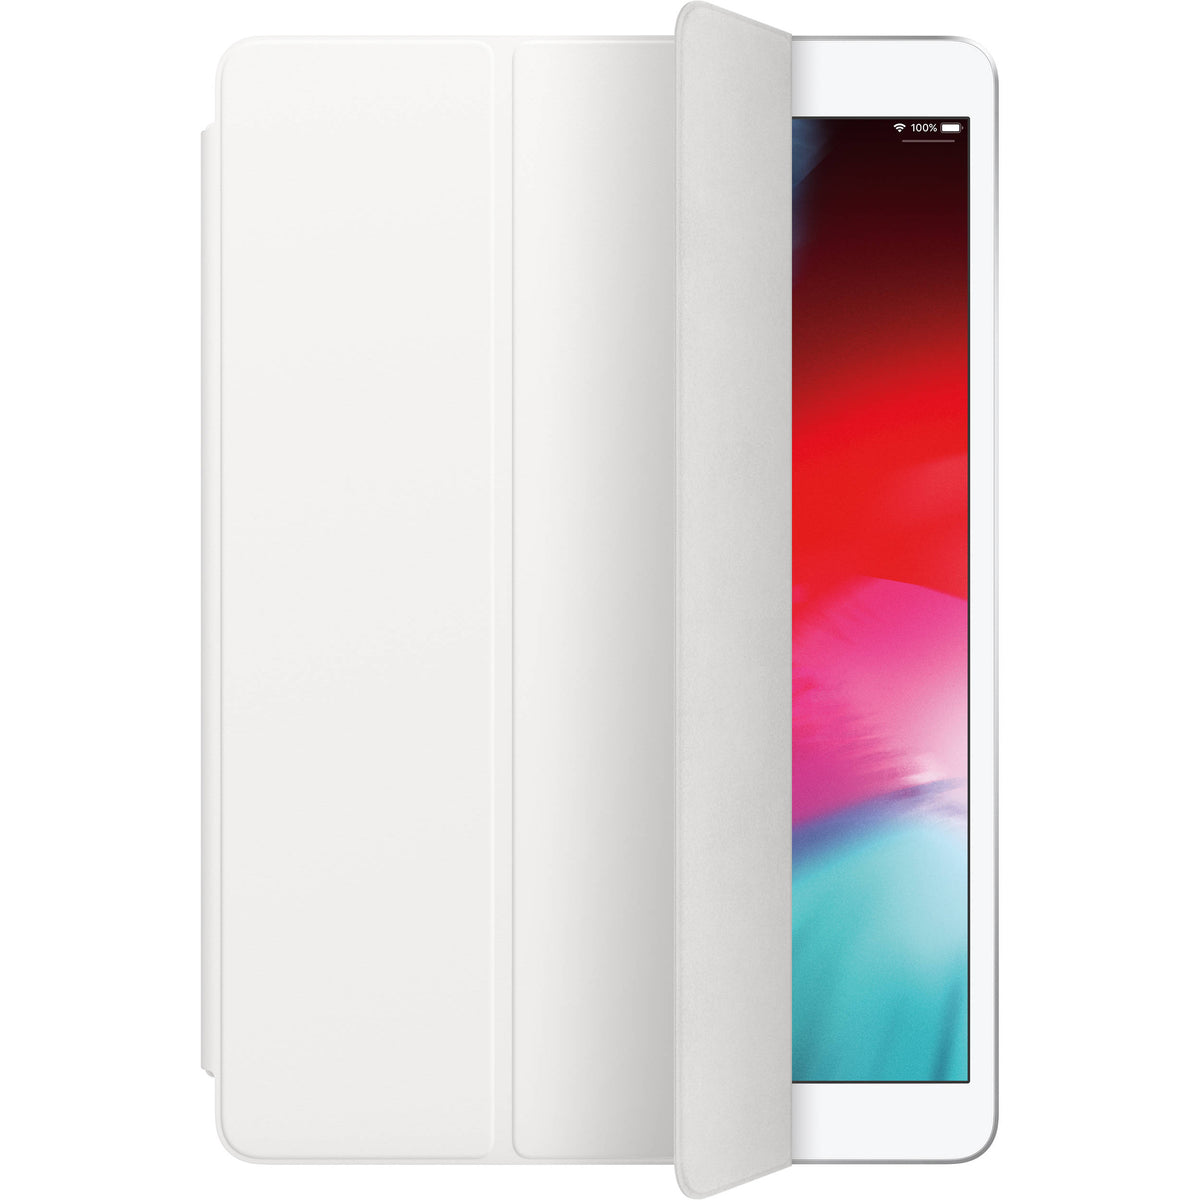 Smart Cover for iPad (7th generation) and iPad Air (3rd generation)